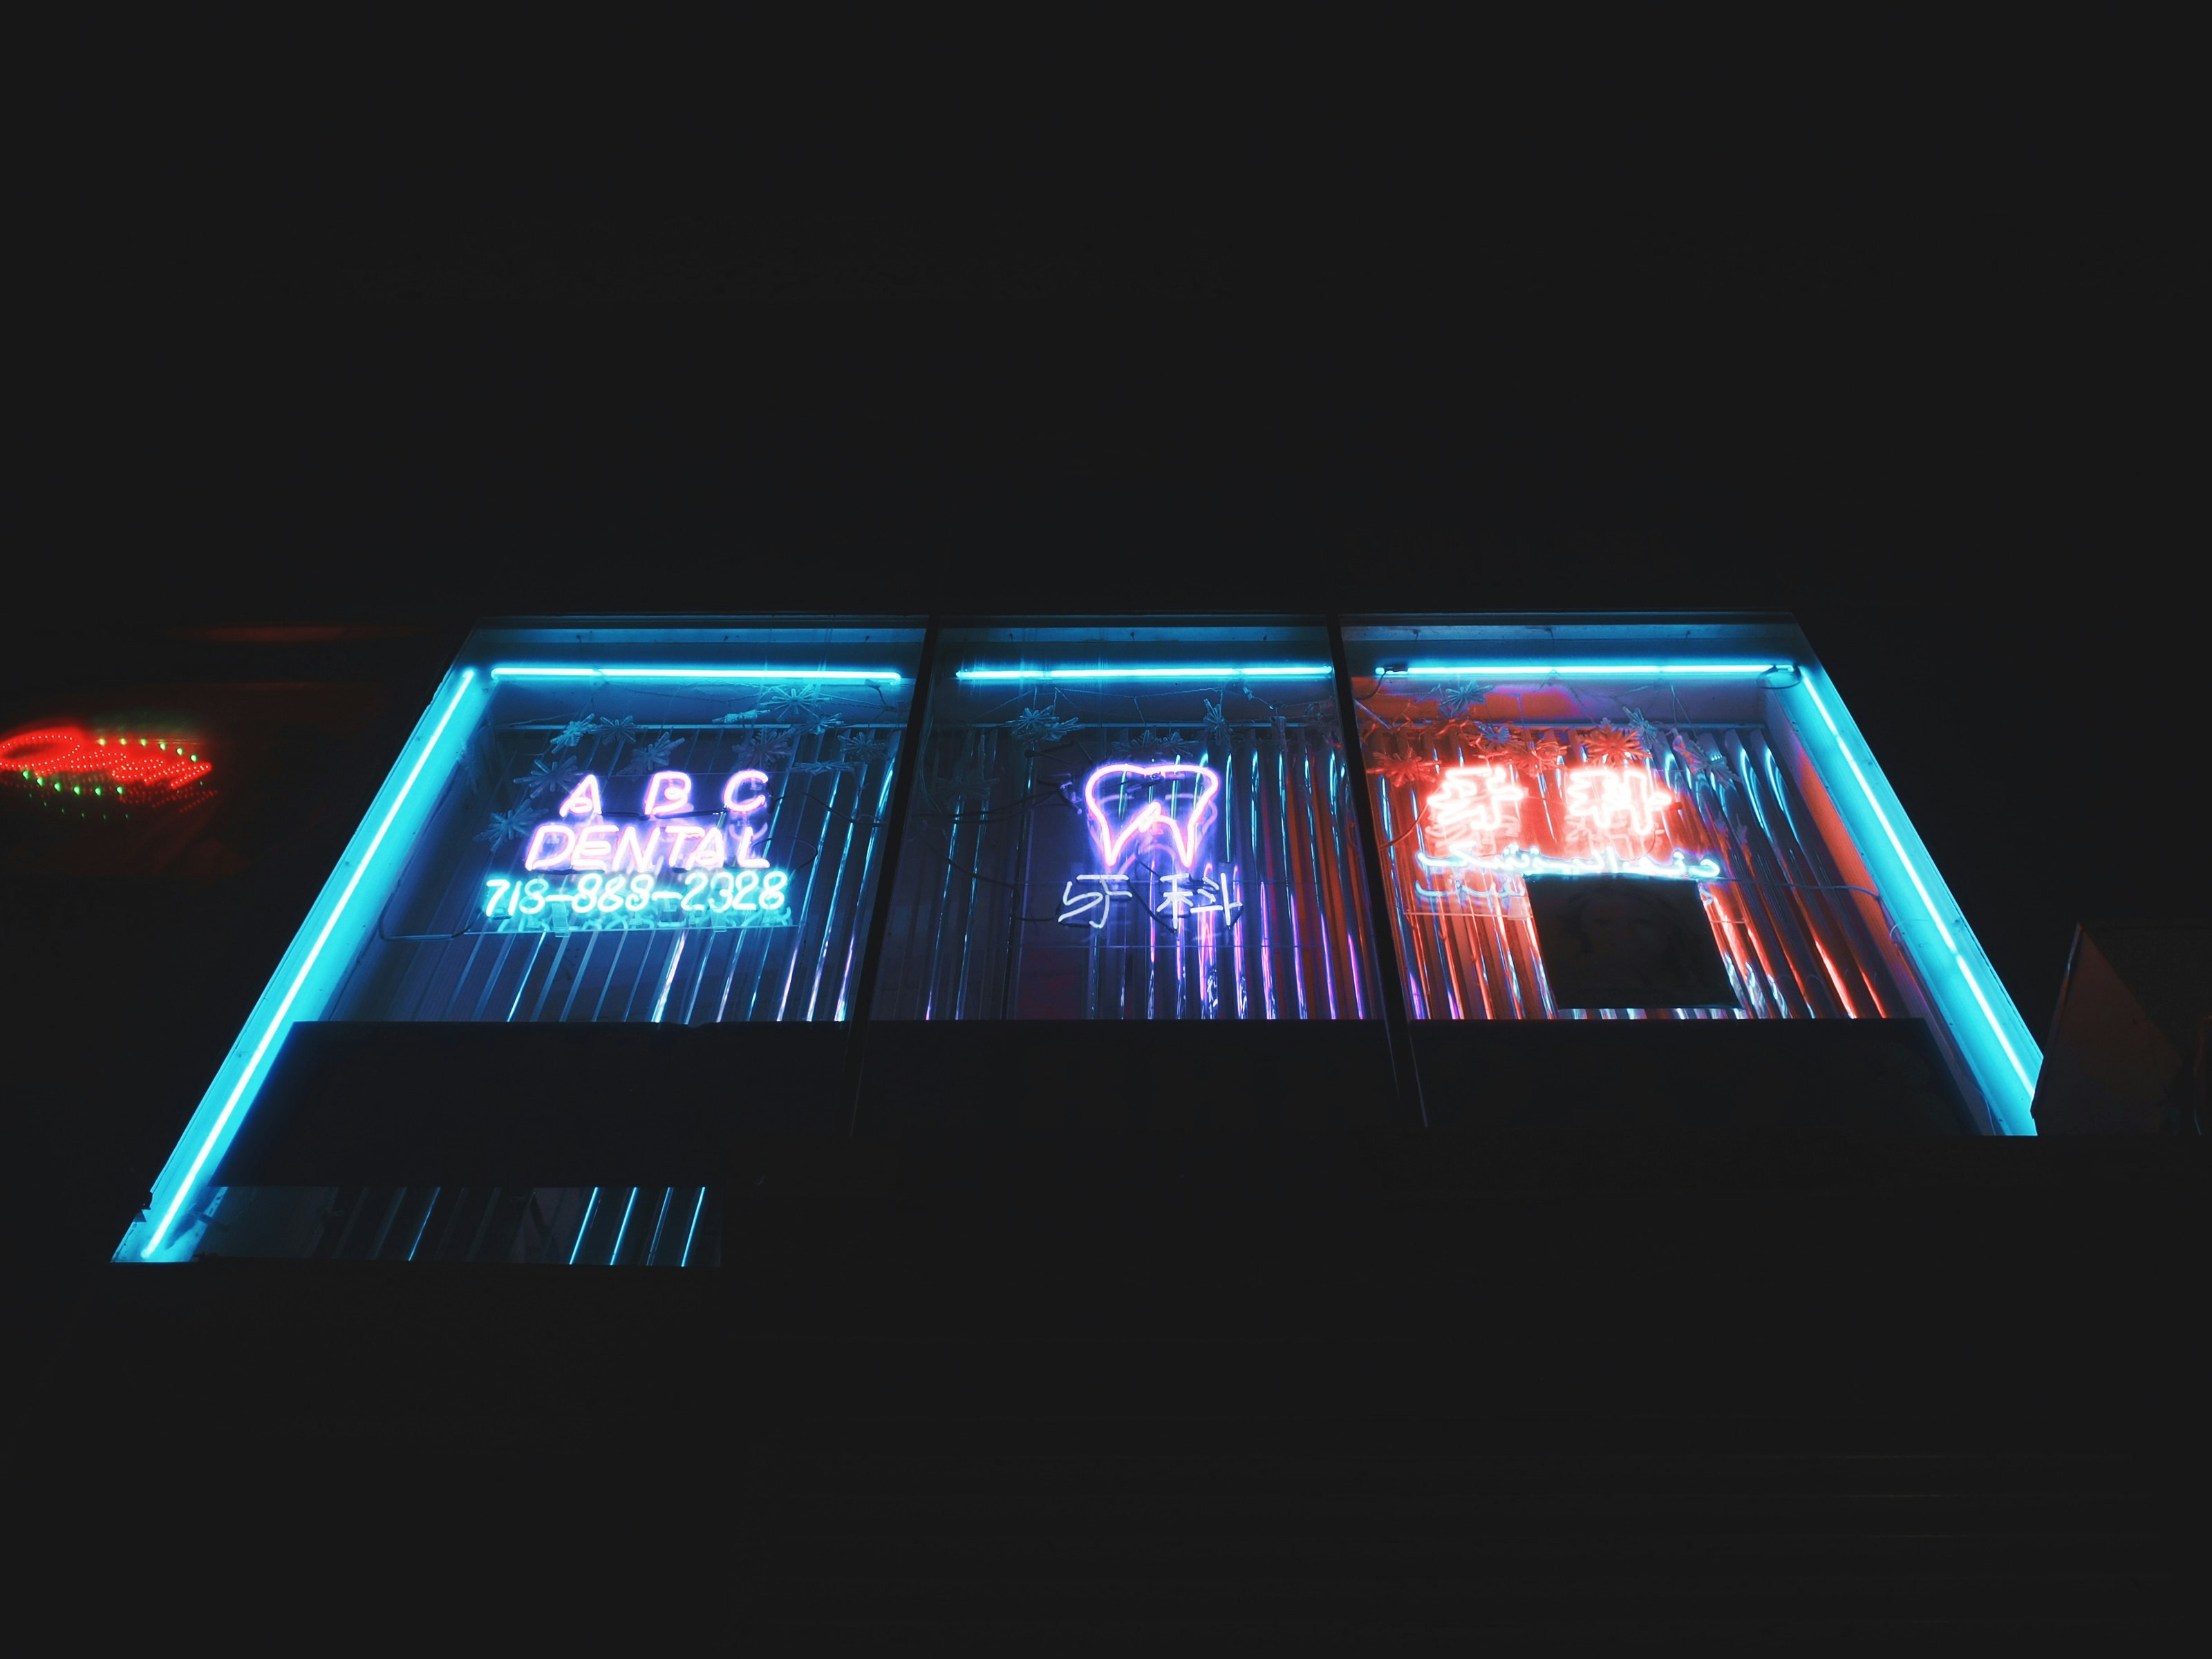 neon light signages during night time